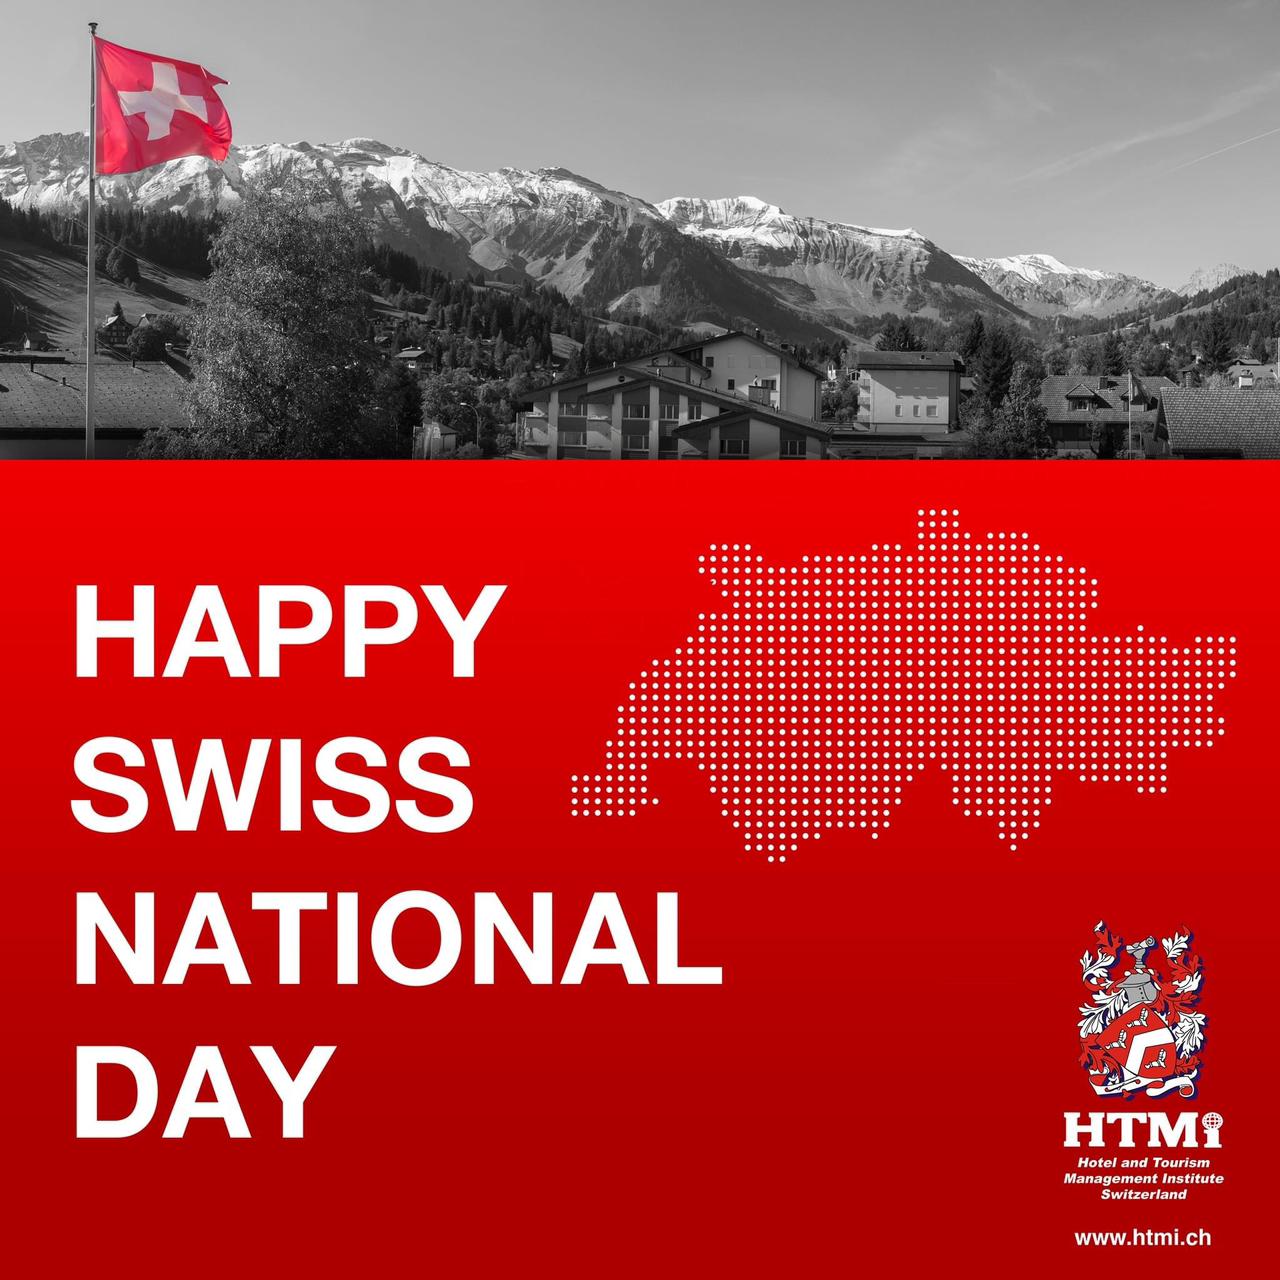 Swiss National Day 1 Aug